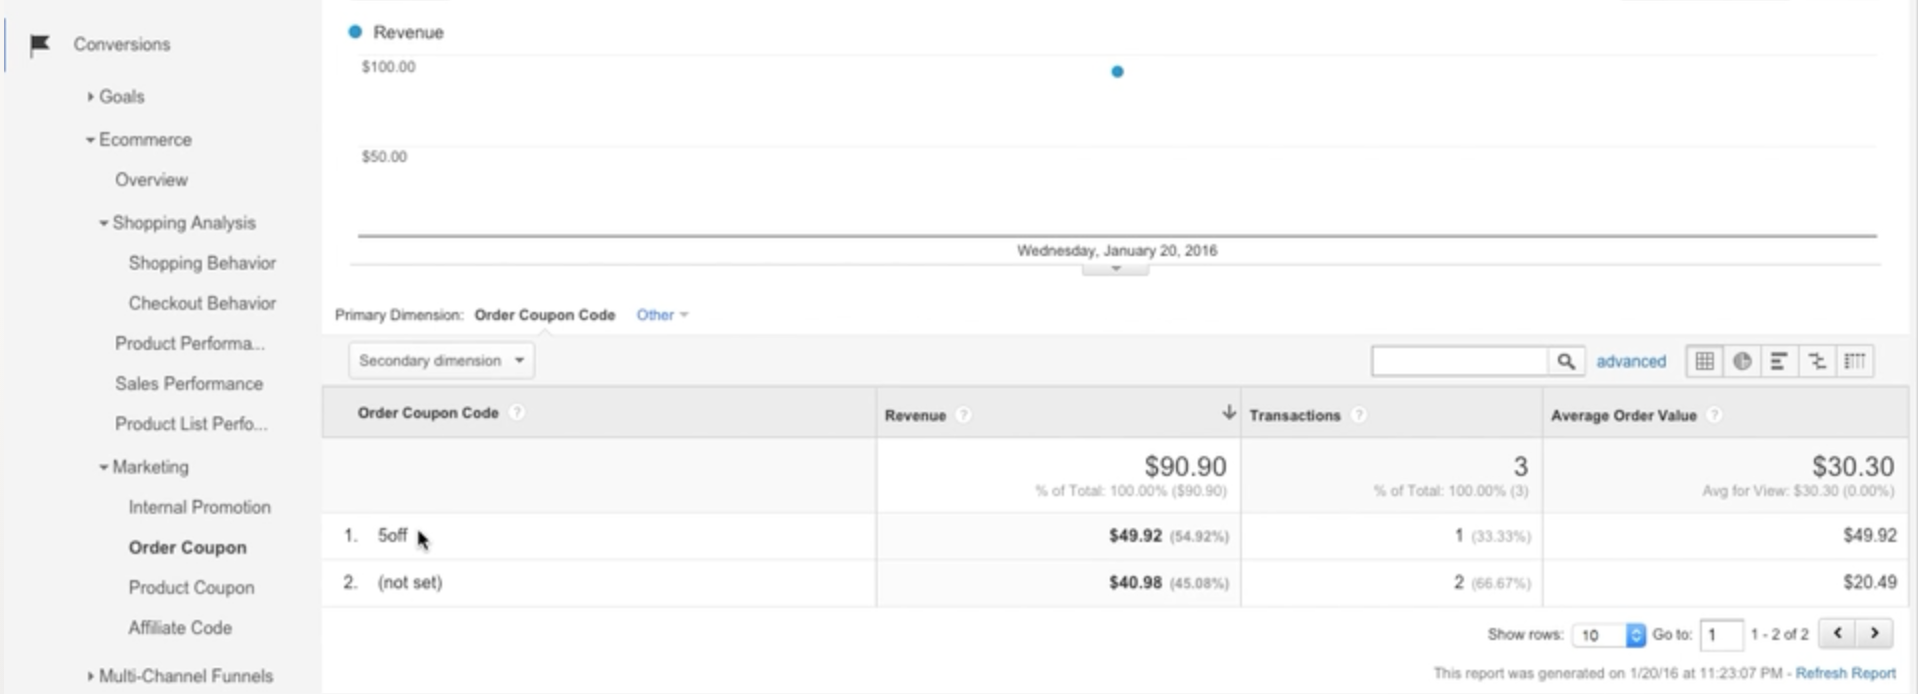 In this example screenshot, you can see reporting of a "5off" coupon having been used.